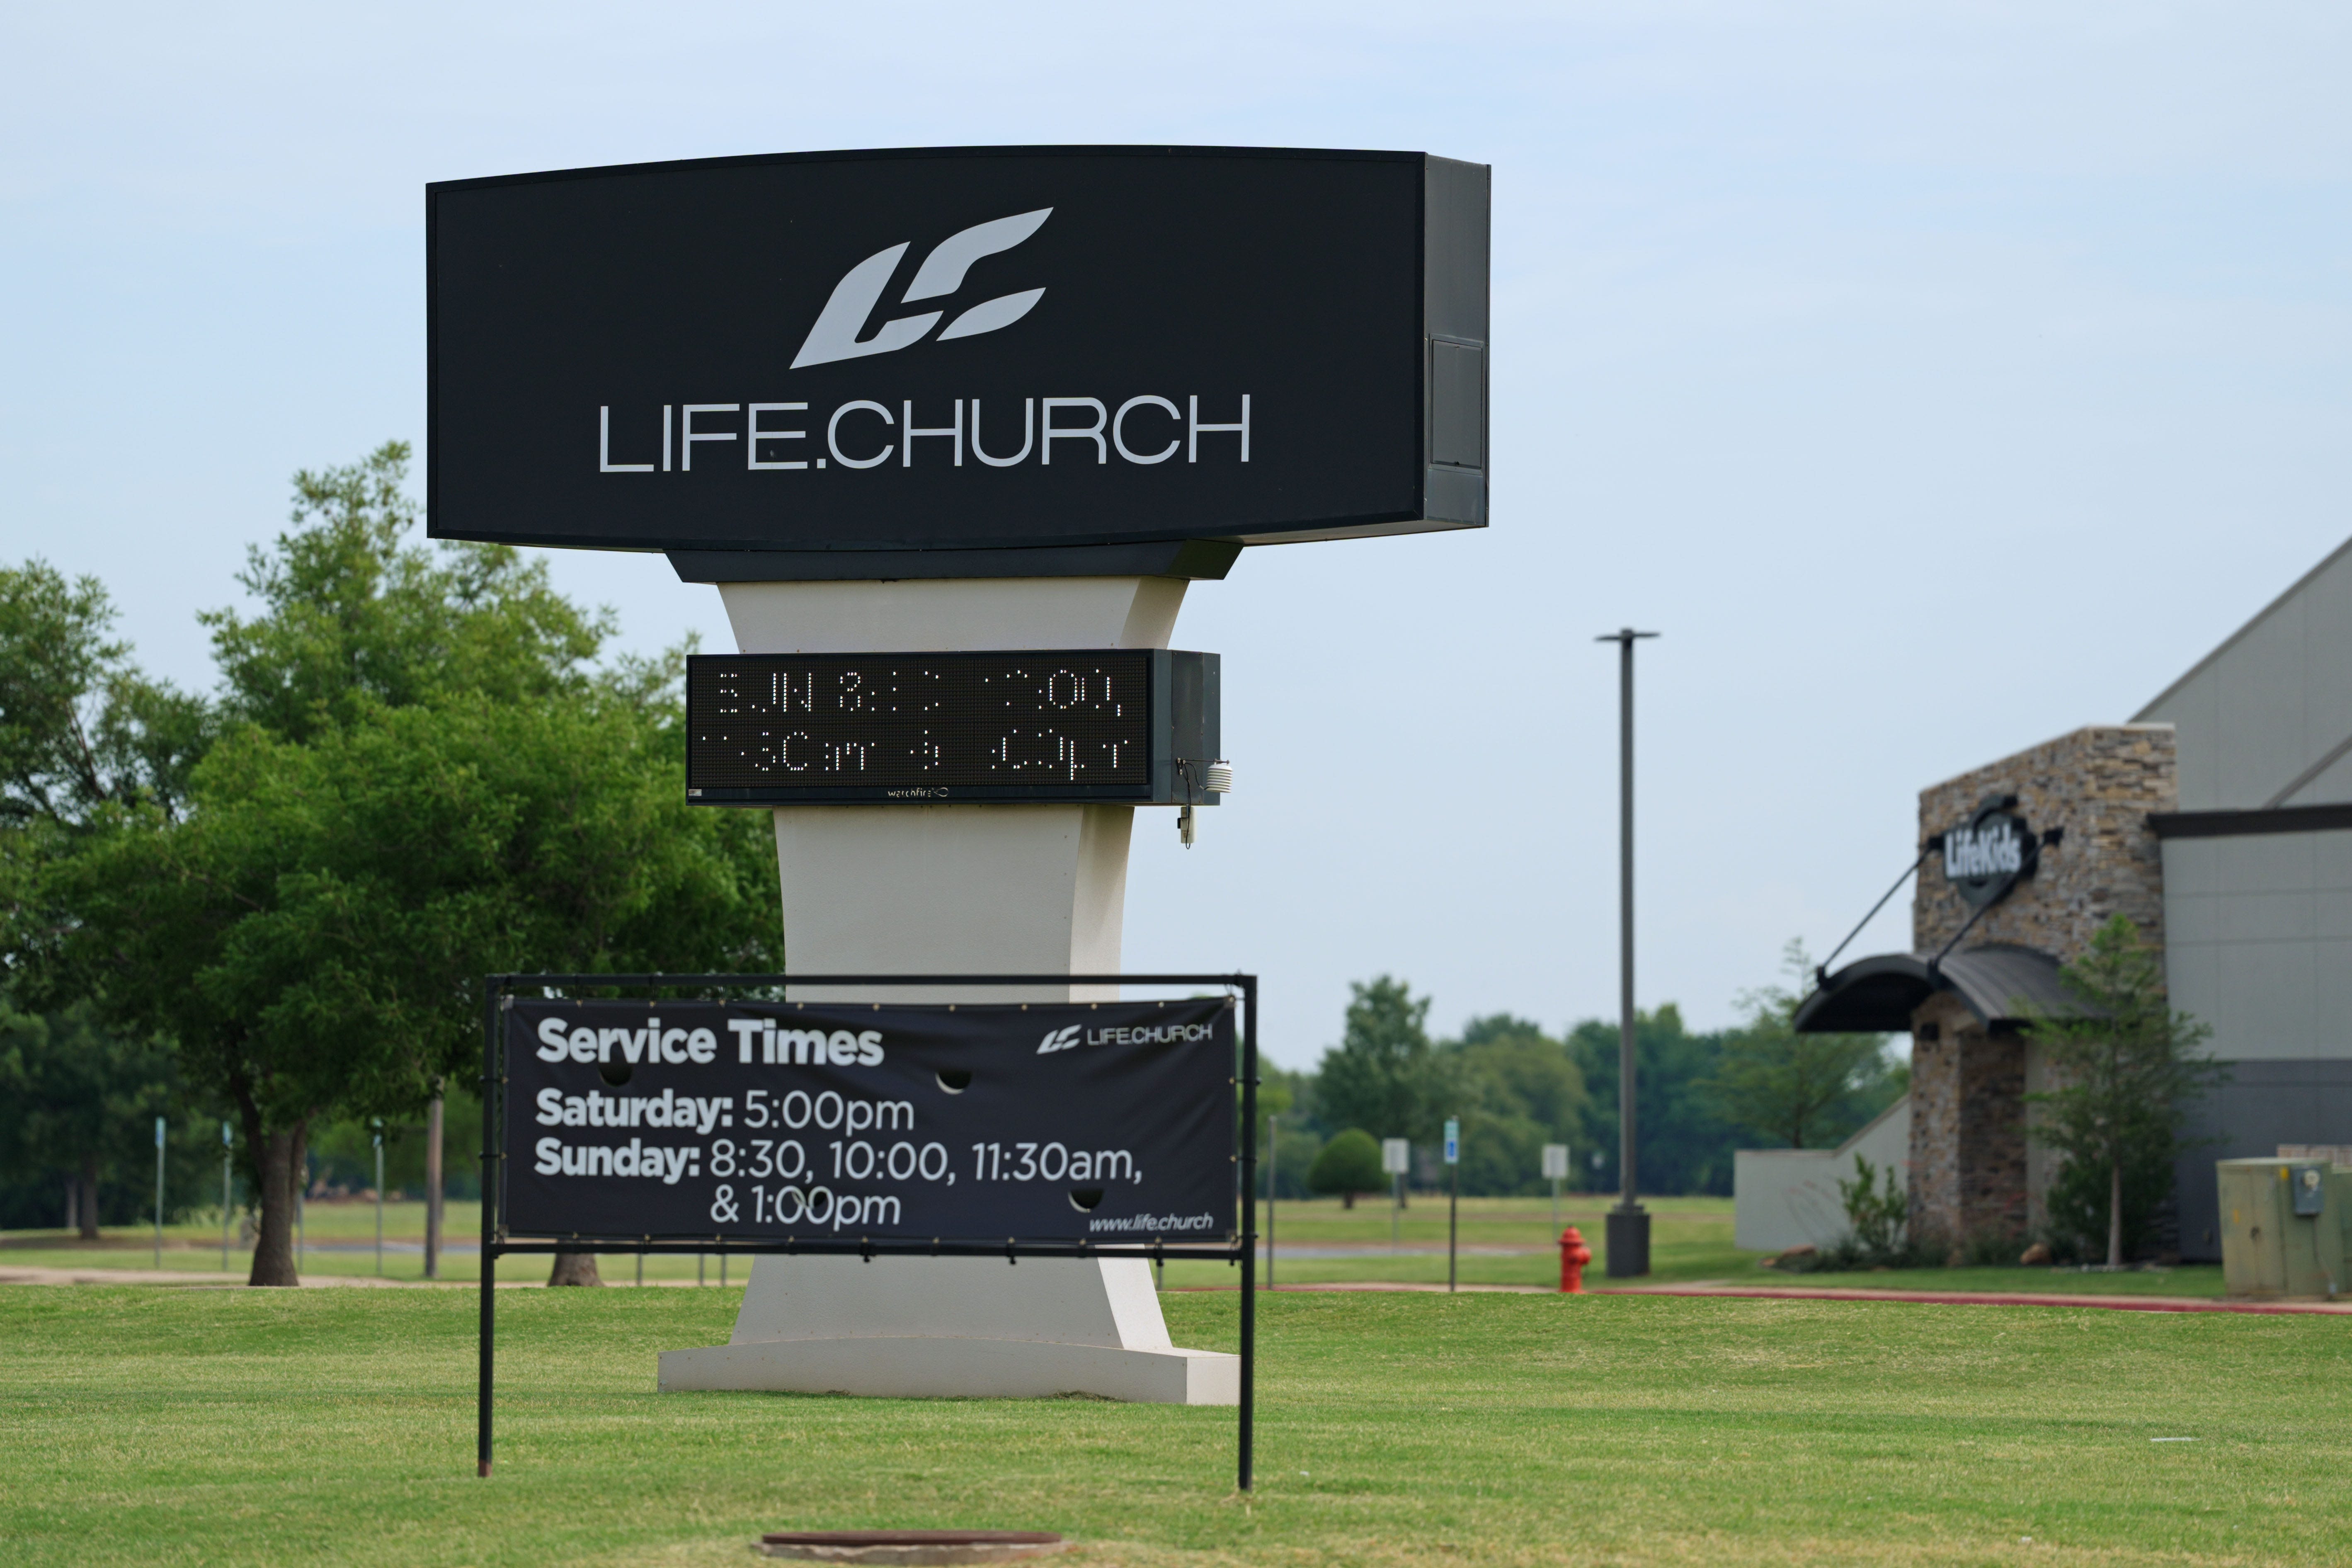 Oklahoma-based church named one of the largest in the US, others ranked as fastest-growing